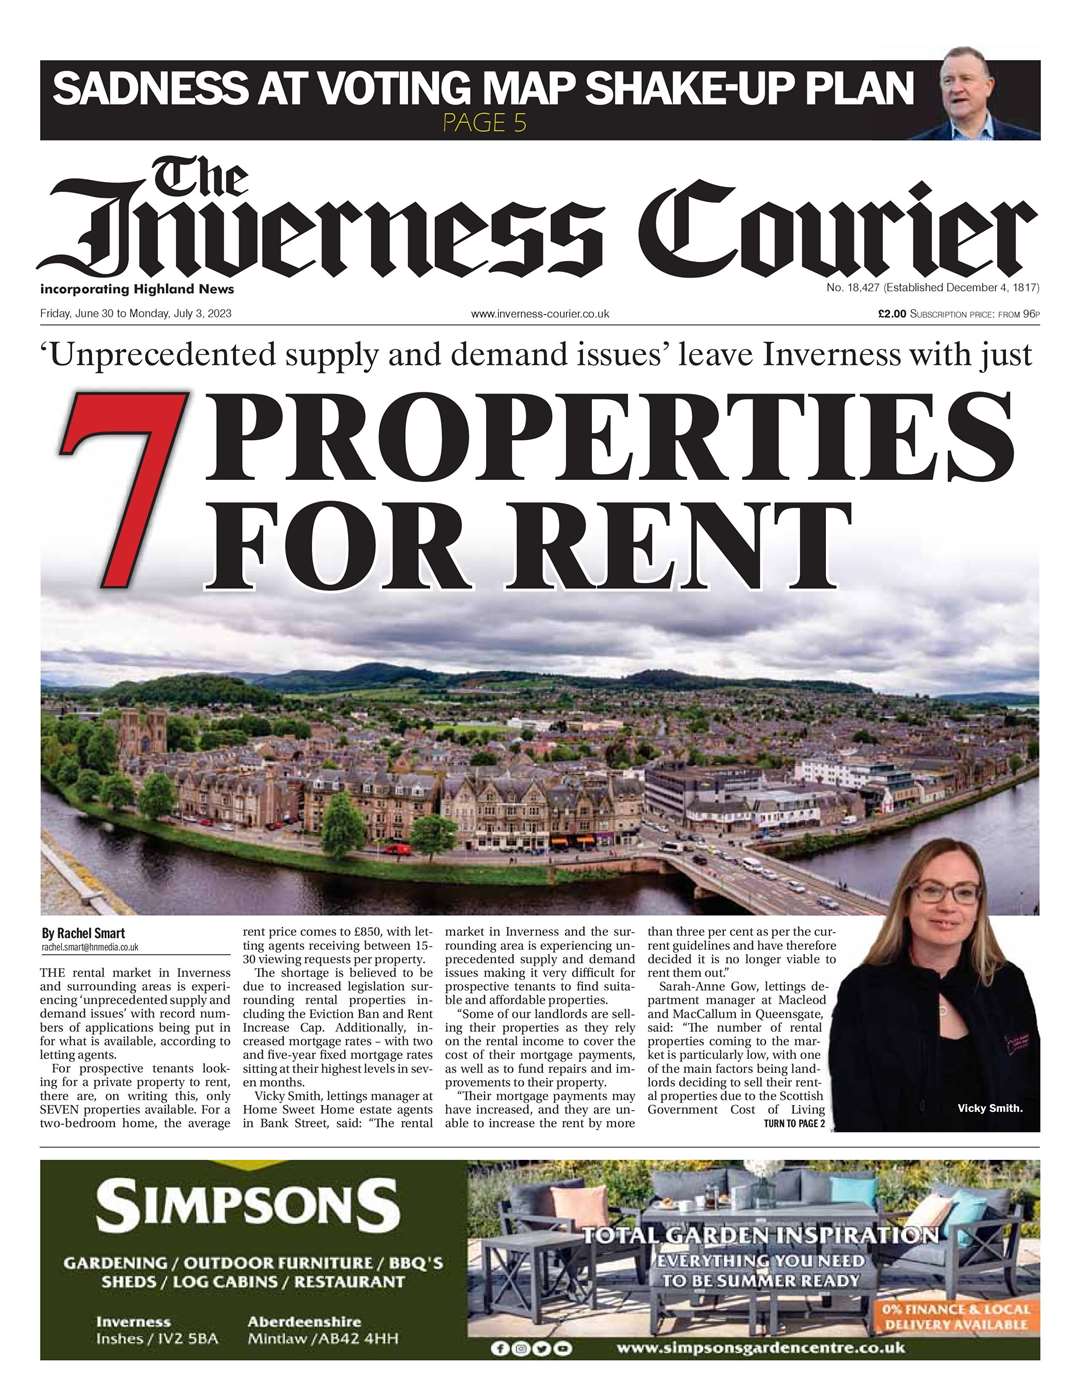 The Inverness Courier, June 30, front page.